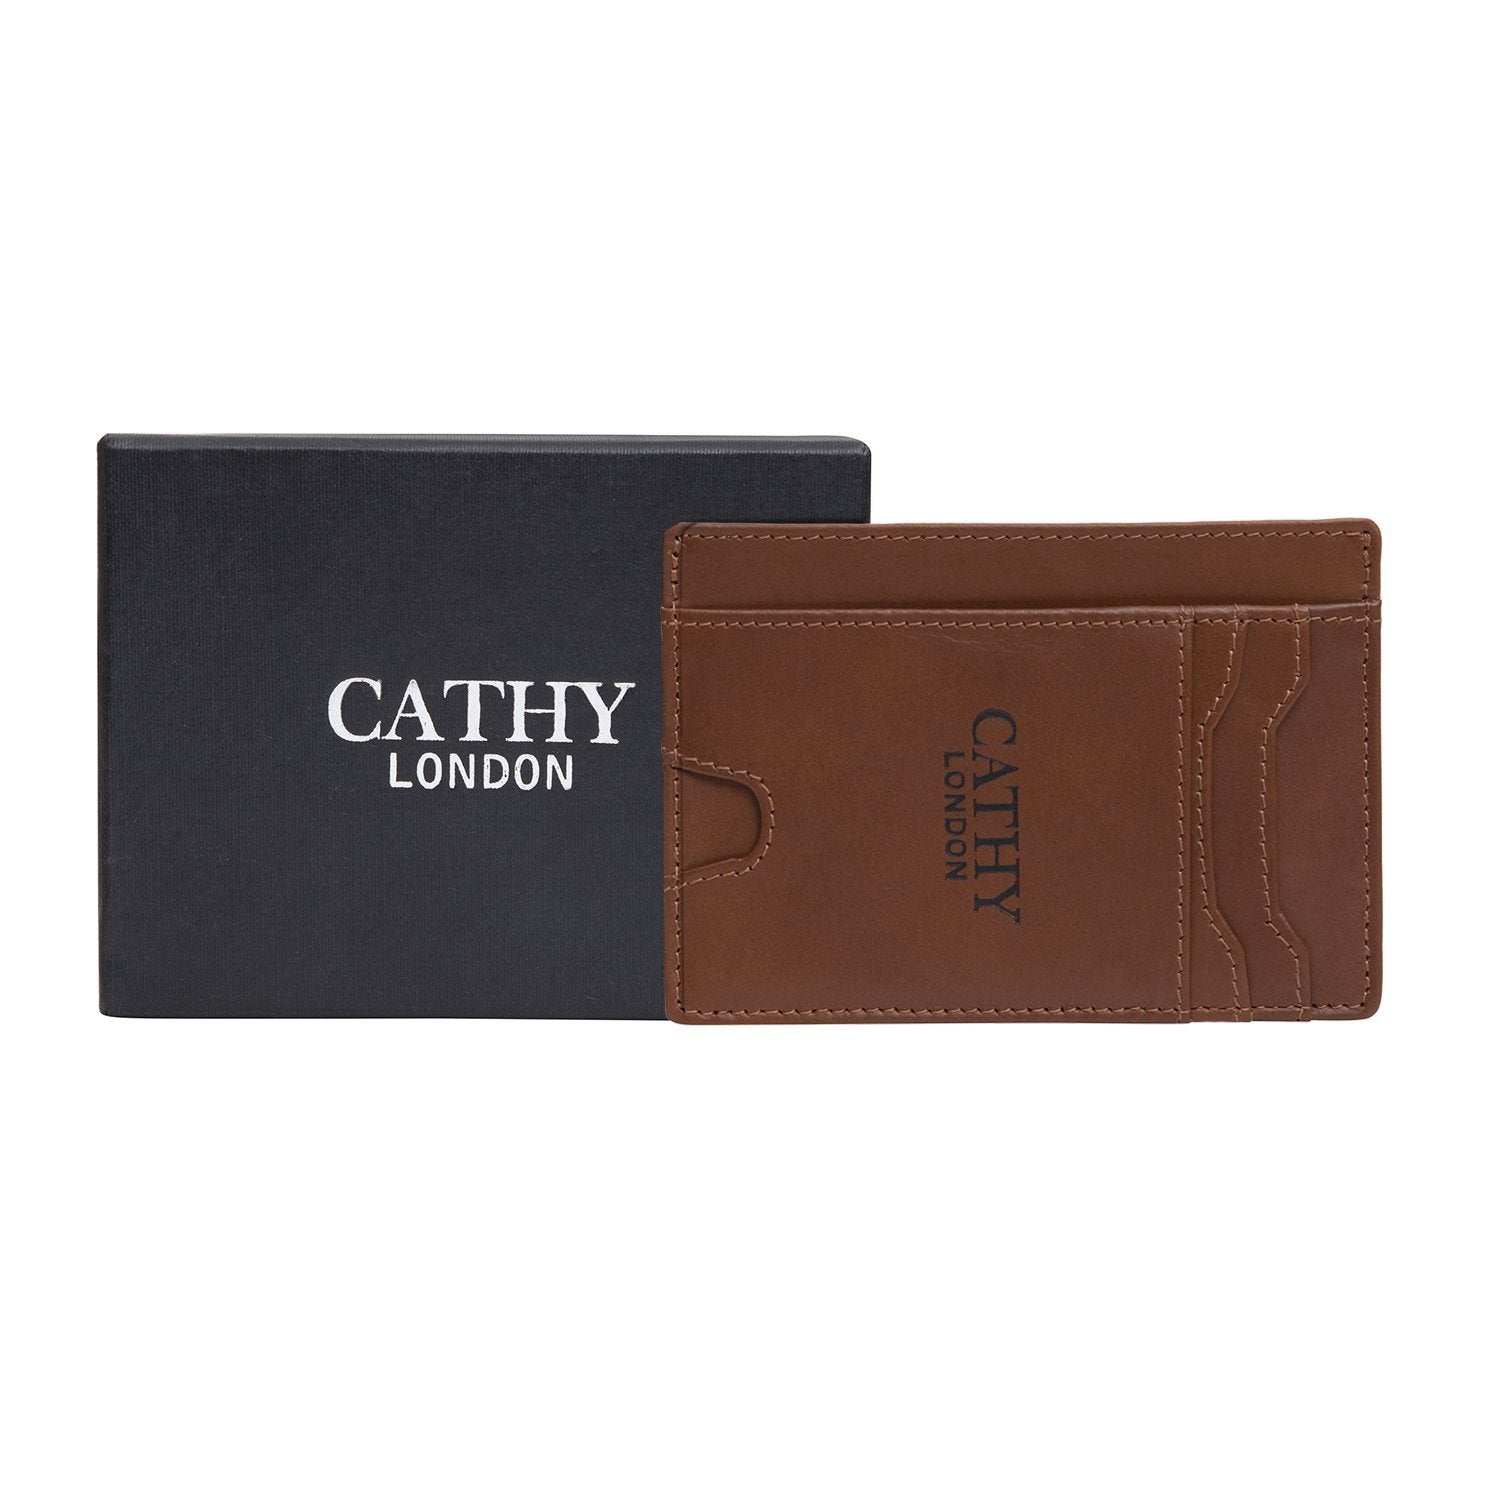 Brown Colour Italian Leather Card Holder/Slim Wallet (5 Card Slot + 1 ID Slot + Cash Compartment) Cathy London 